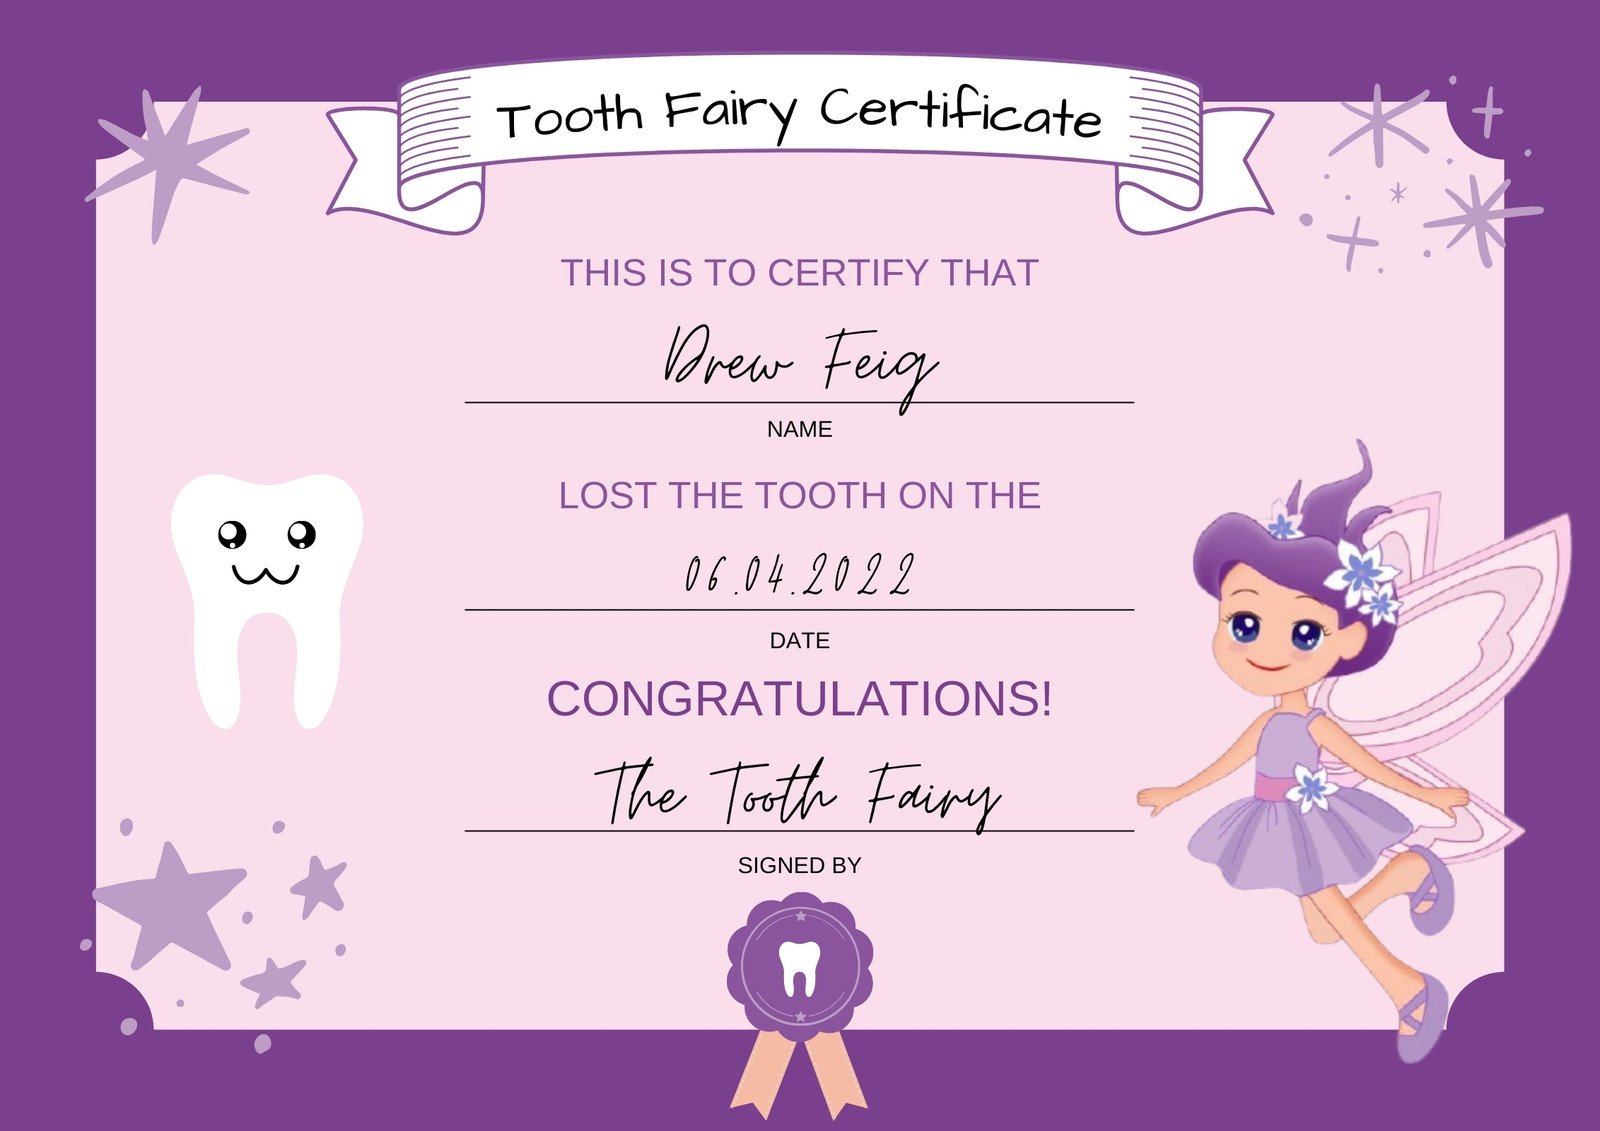 Tooth Fairy Certificate Pdf